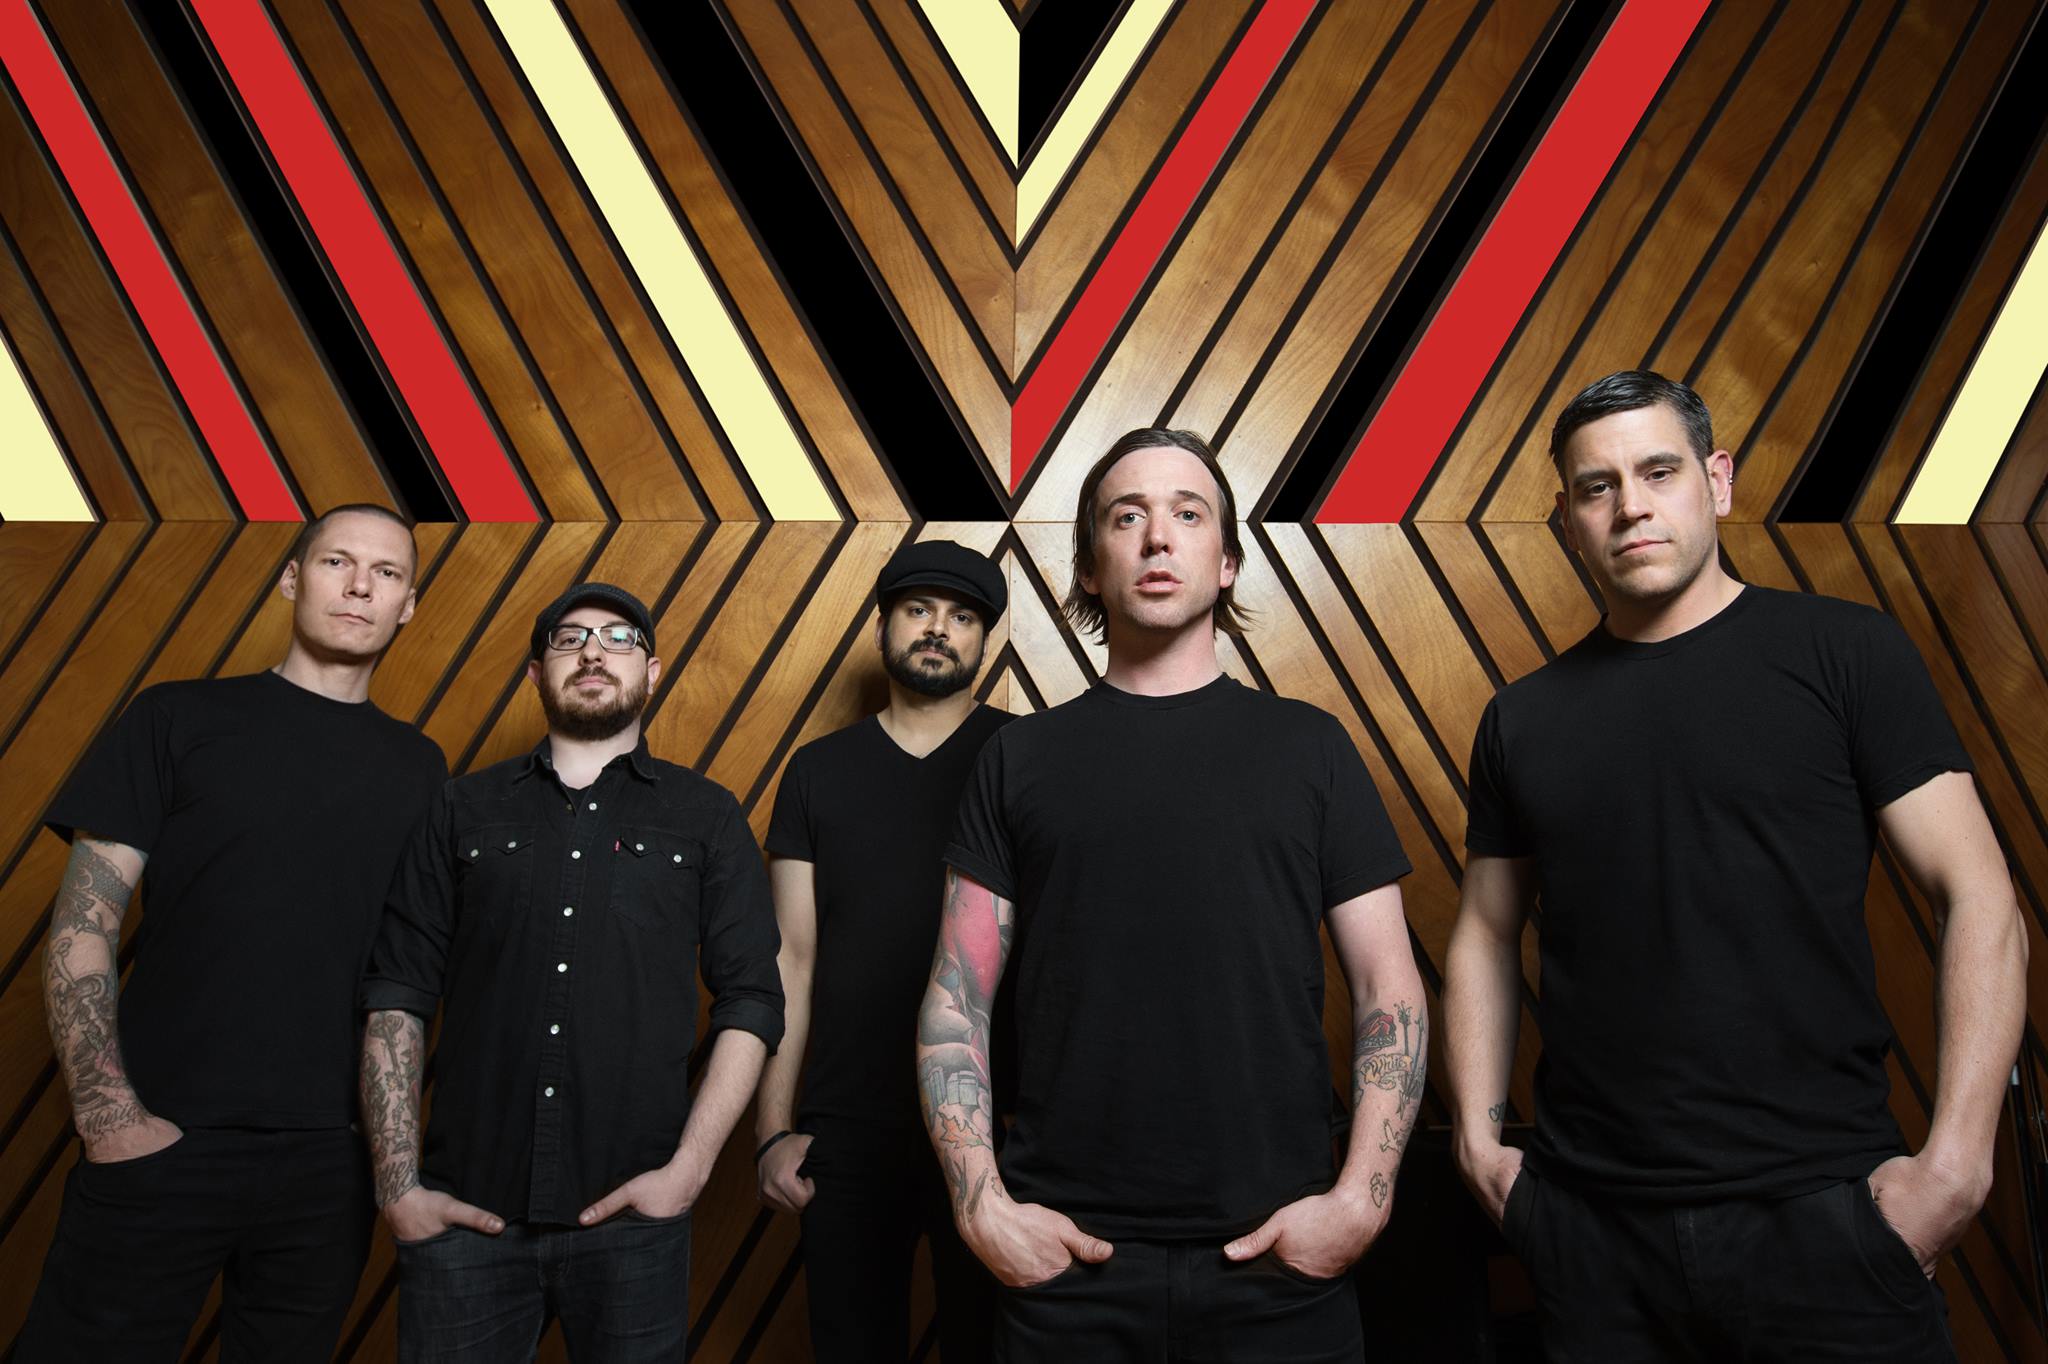 Billy Talent – Afraid of Heights